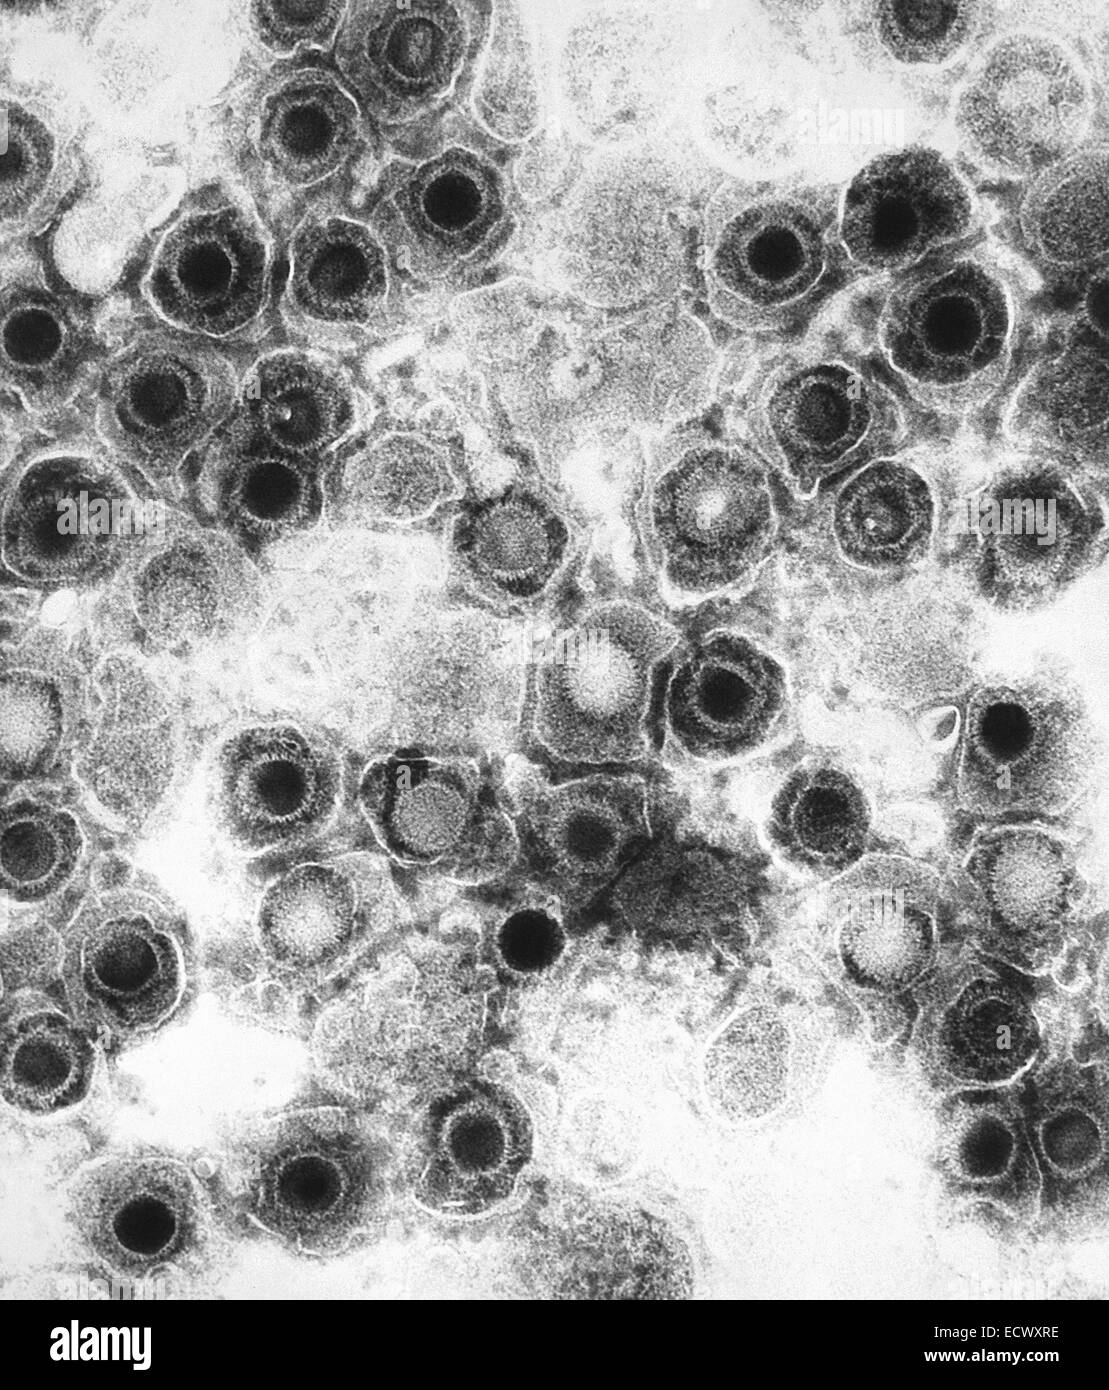 Transmission electron micrograph of herpes simplex virions. Stock Photo